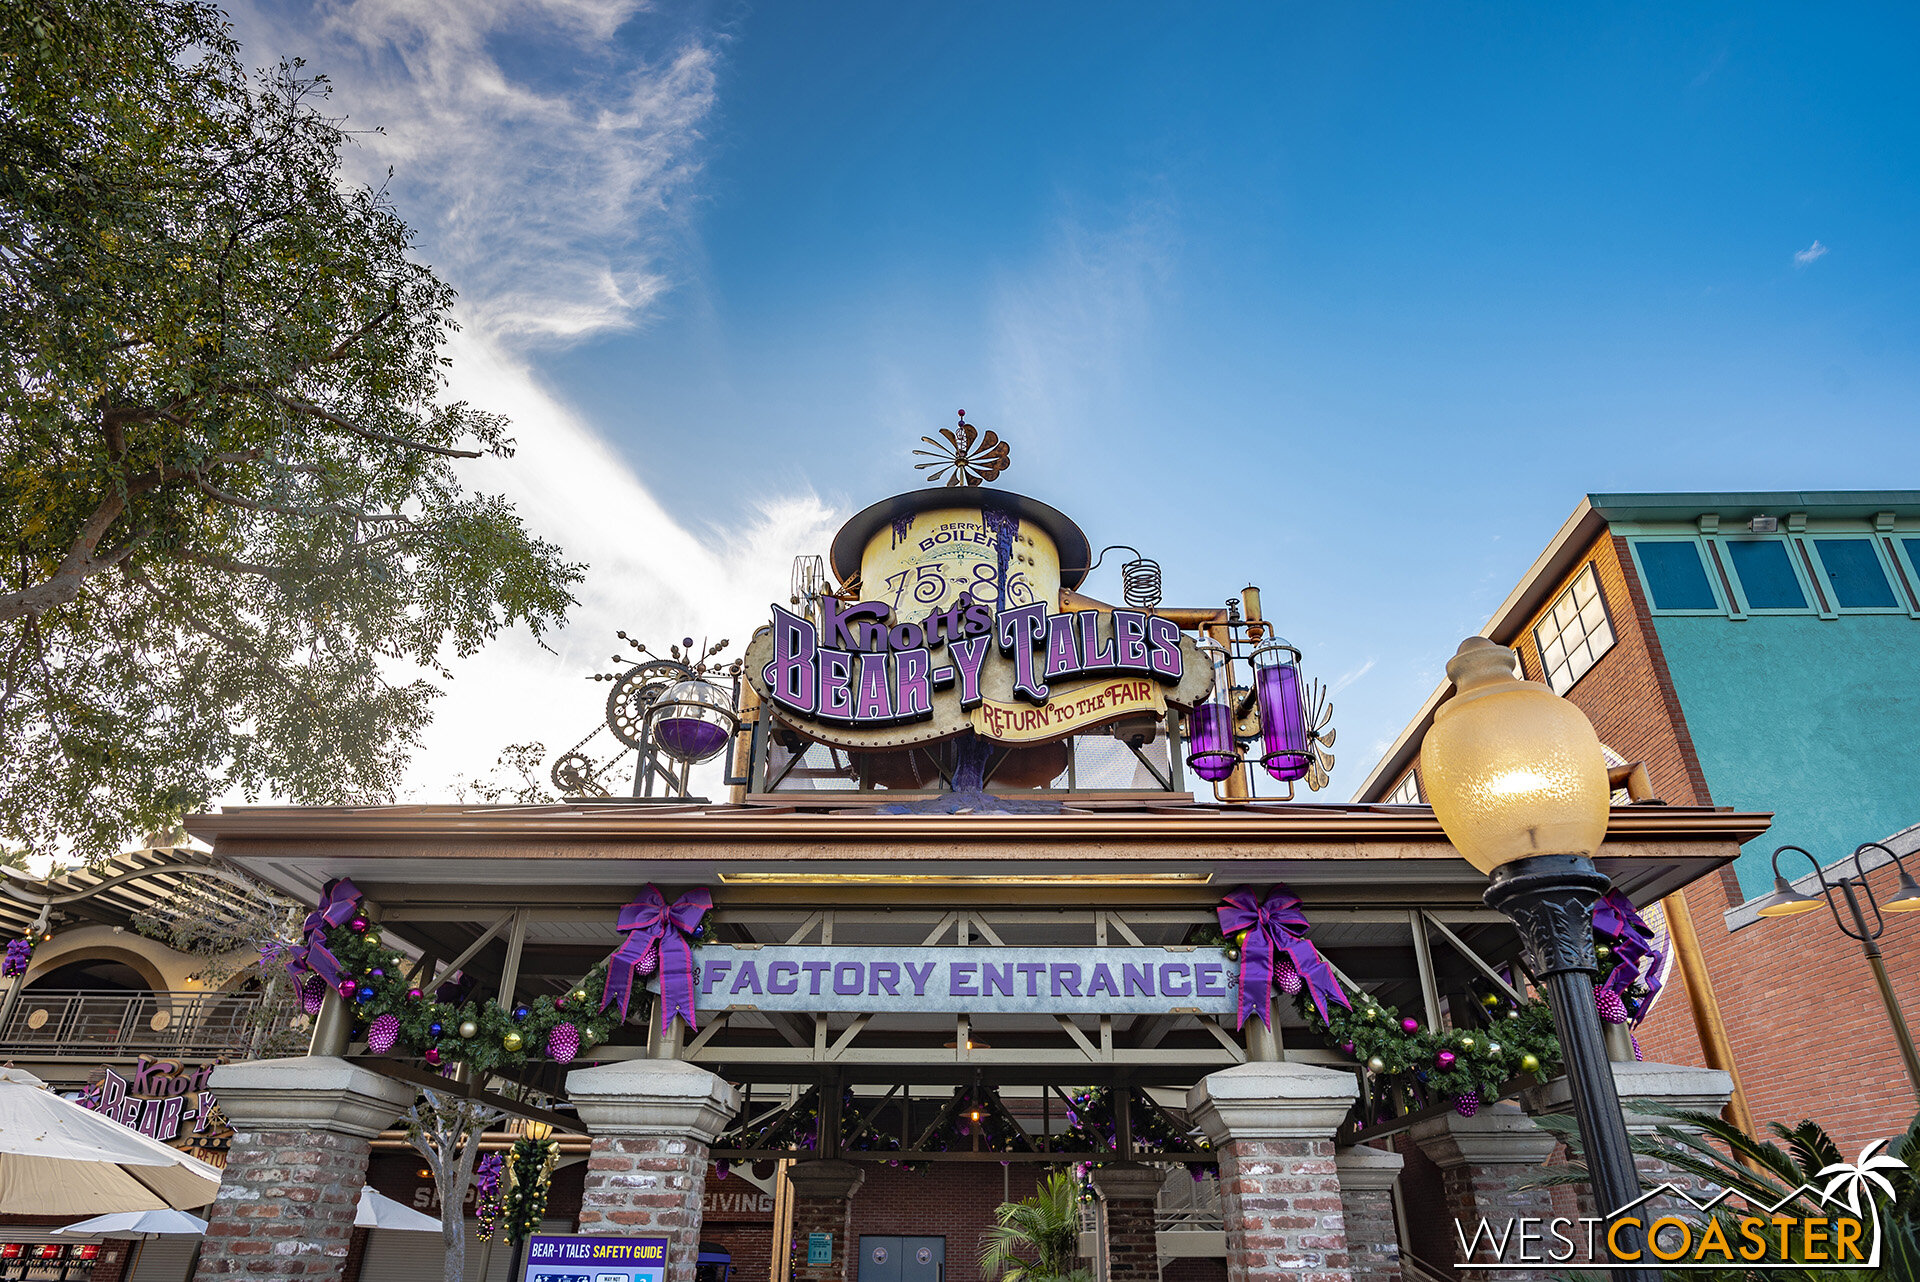  The purple hue looks fantastic, and little details like the oversized boysenberry ornaments are a terrific touch! 